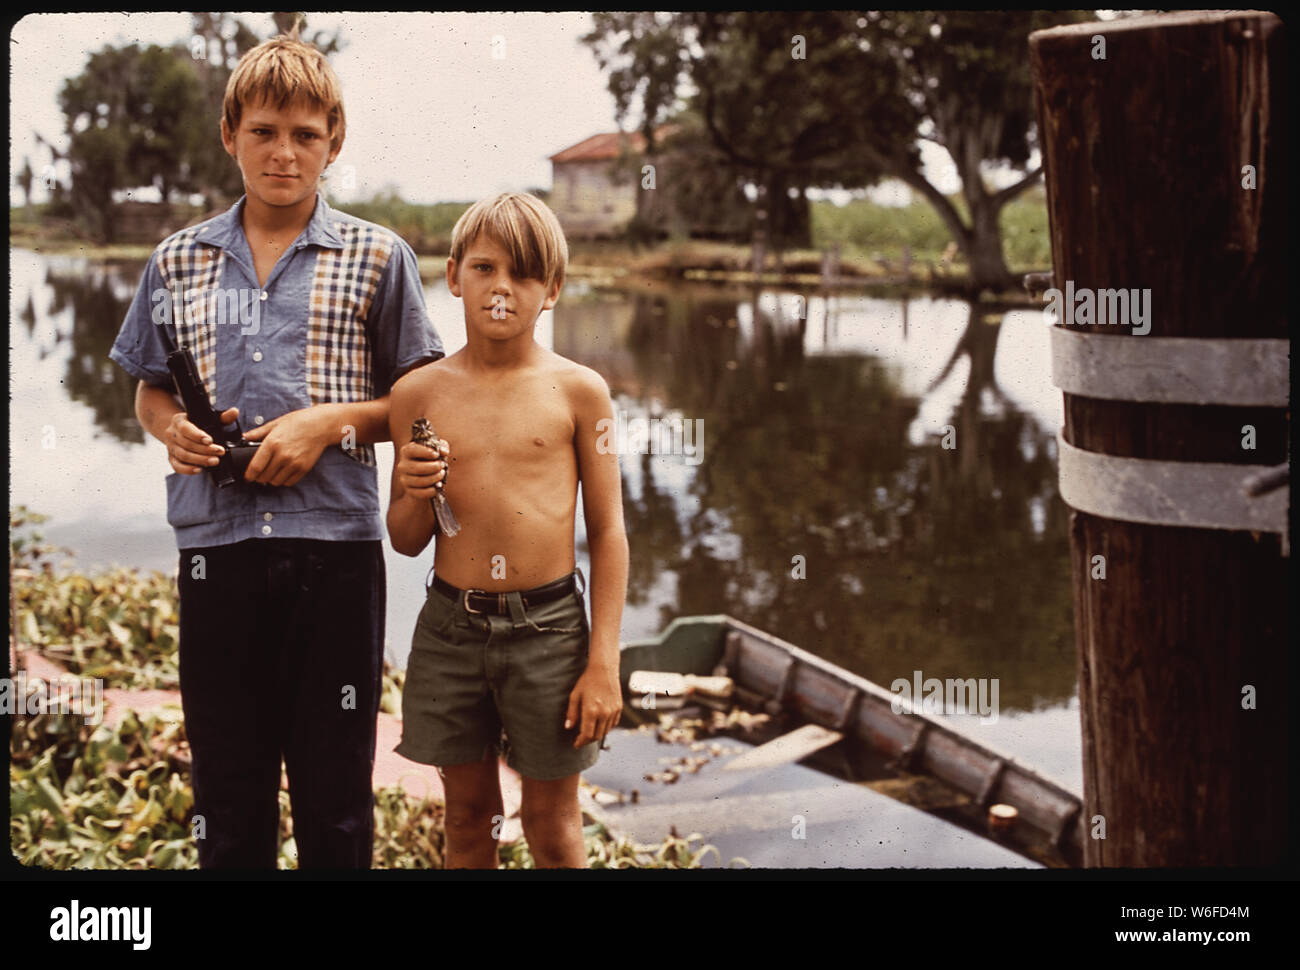 BOYS WITH AIRGUN AND BIRD. THESE FISHERMAN'S SONS LIVE IN BAYOU GAUCHE, DEEP IN THE WETLANDS OF LOUISIANA Stock Photo